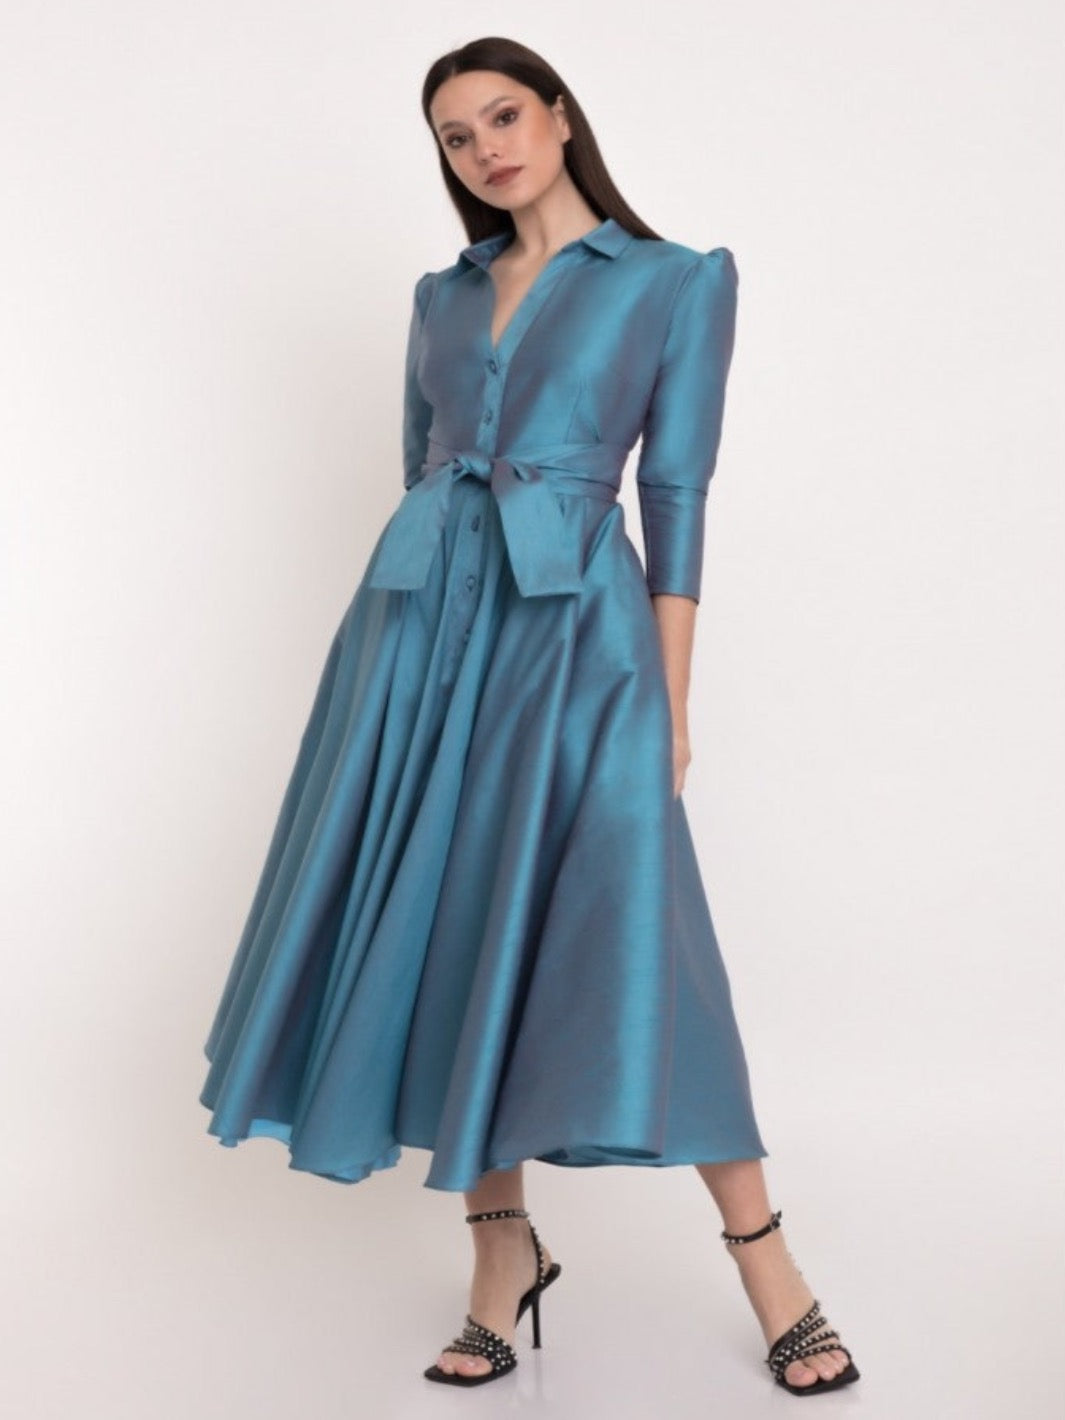 Matilde Cano Dress - R104-Occasion Wear-Guest of the wedding-Nicola Ross